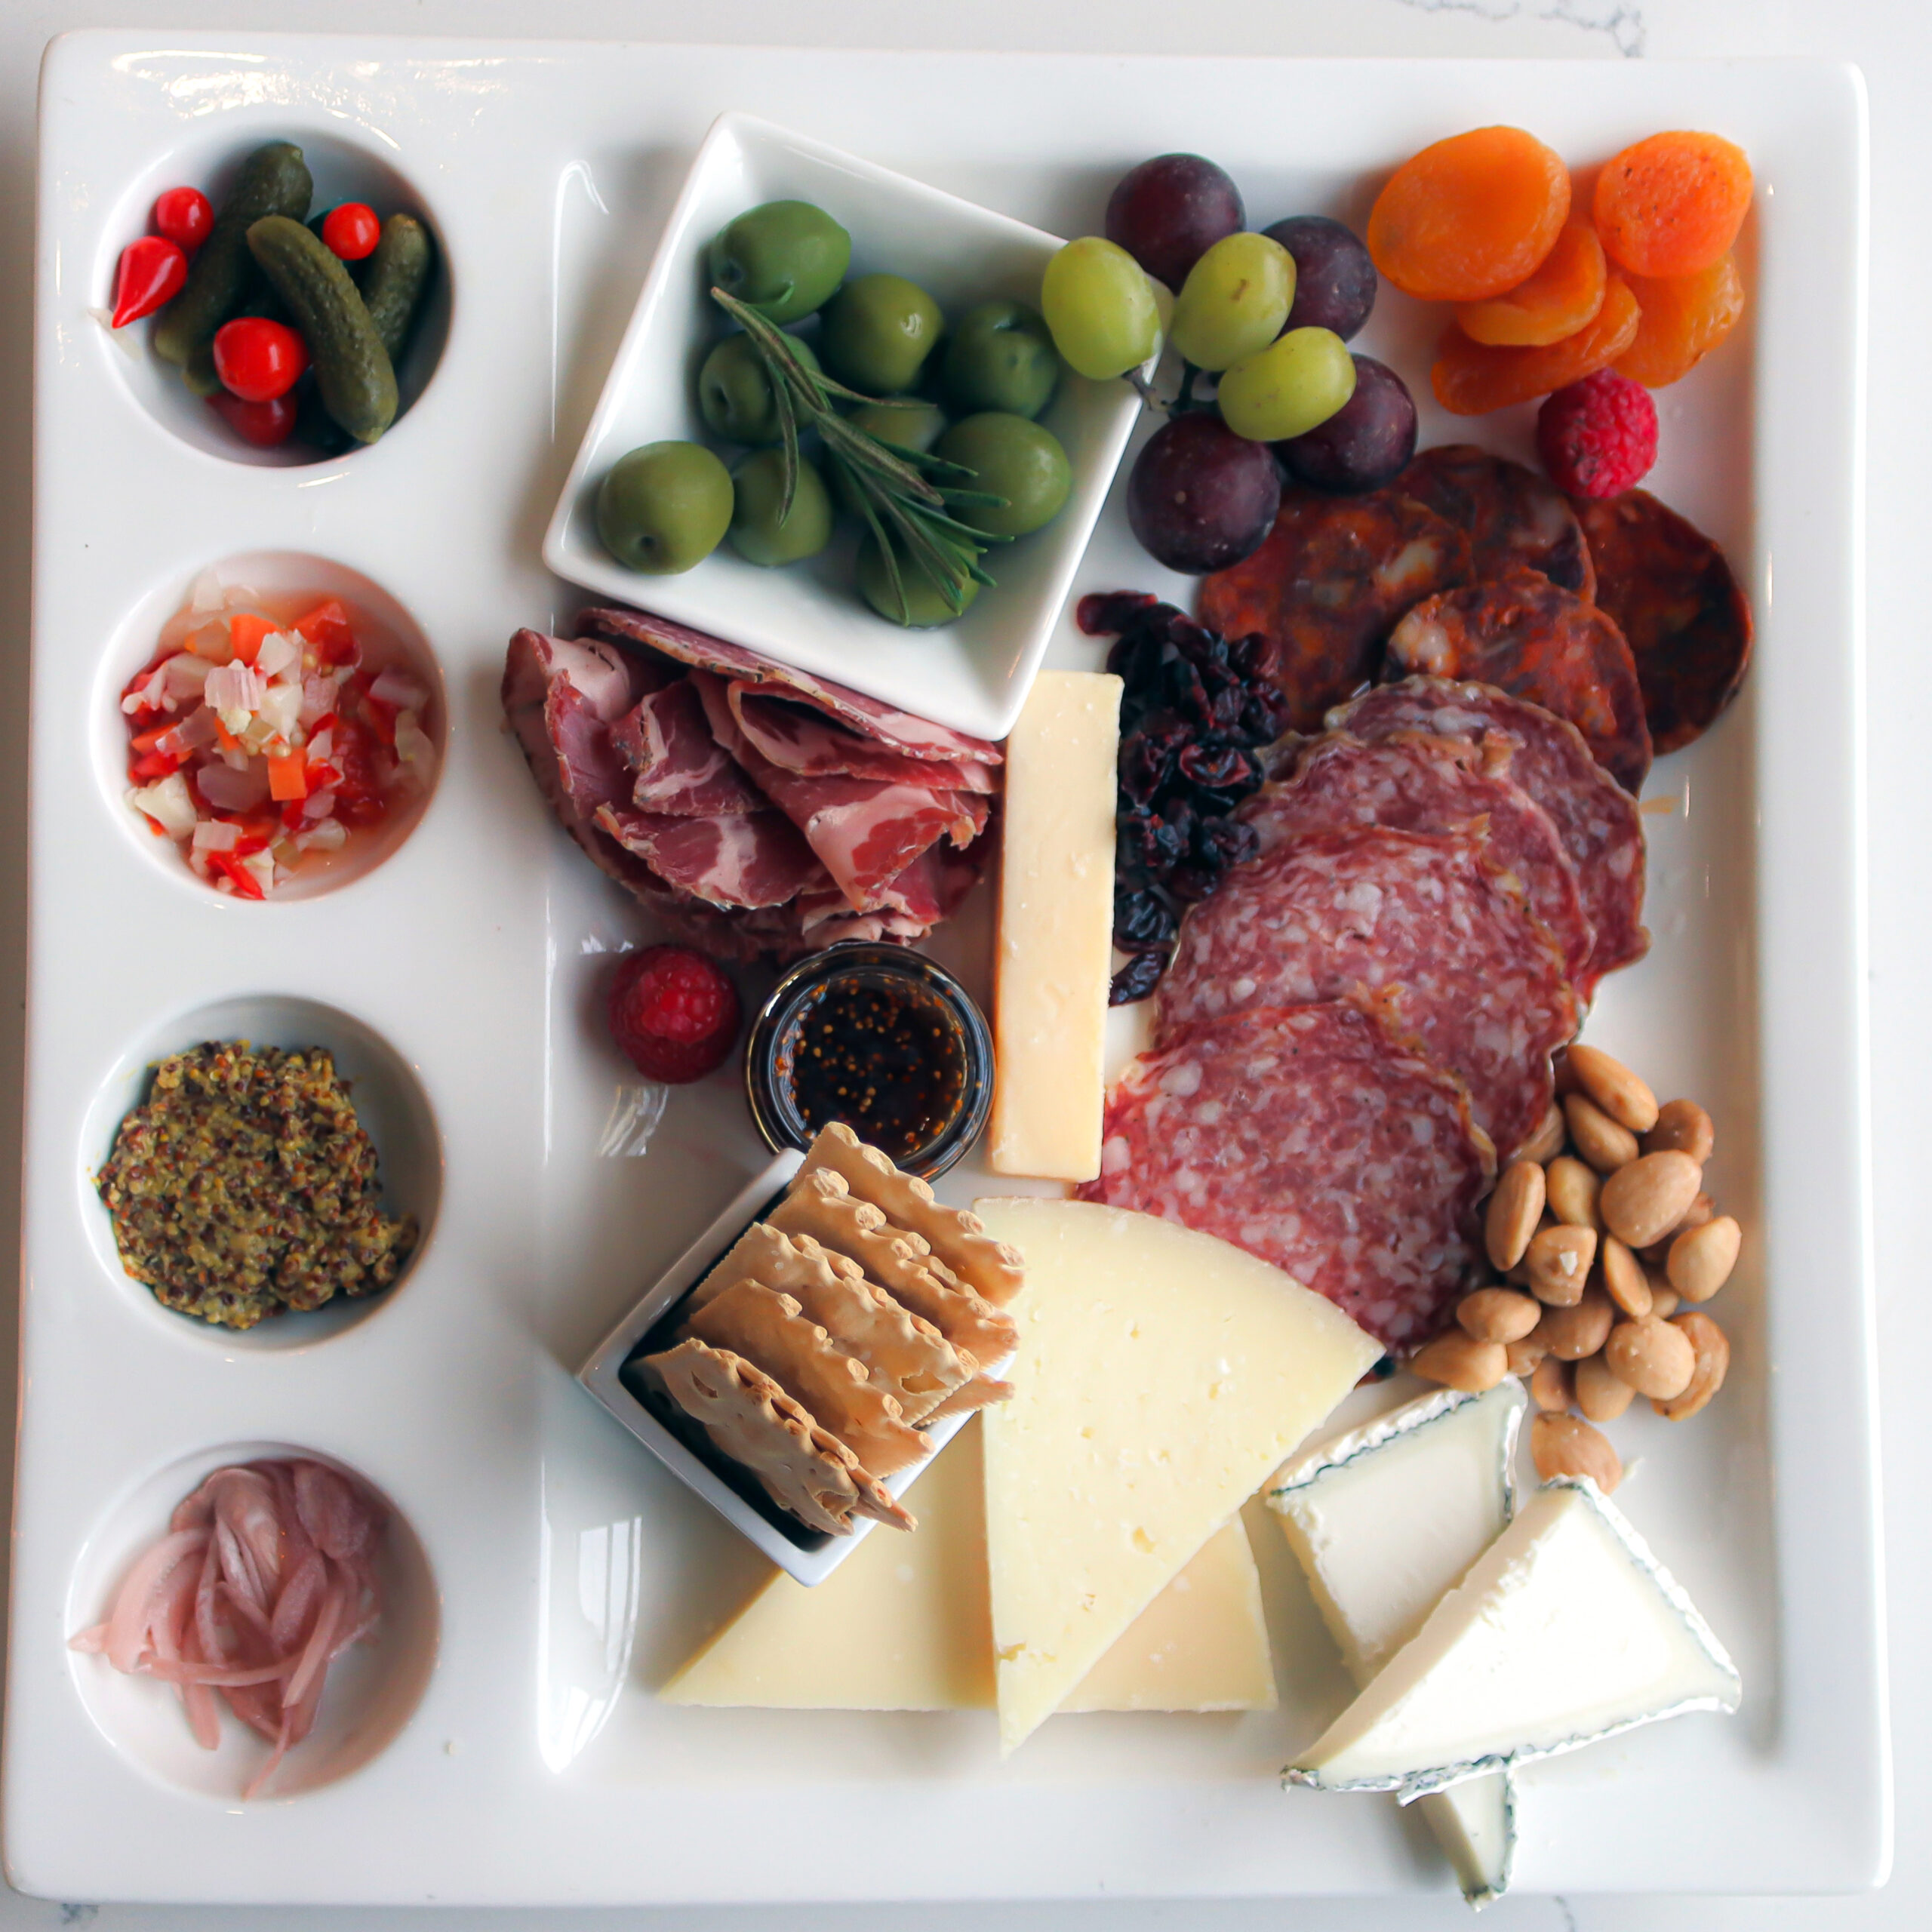 Cheese & Charcuterie Plate – $32